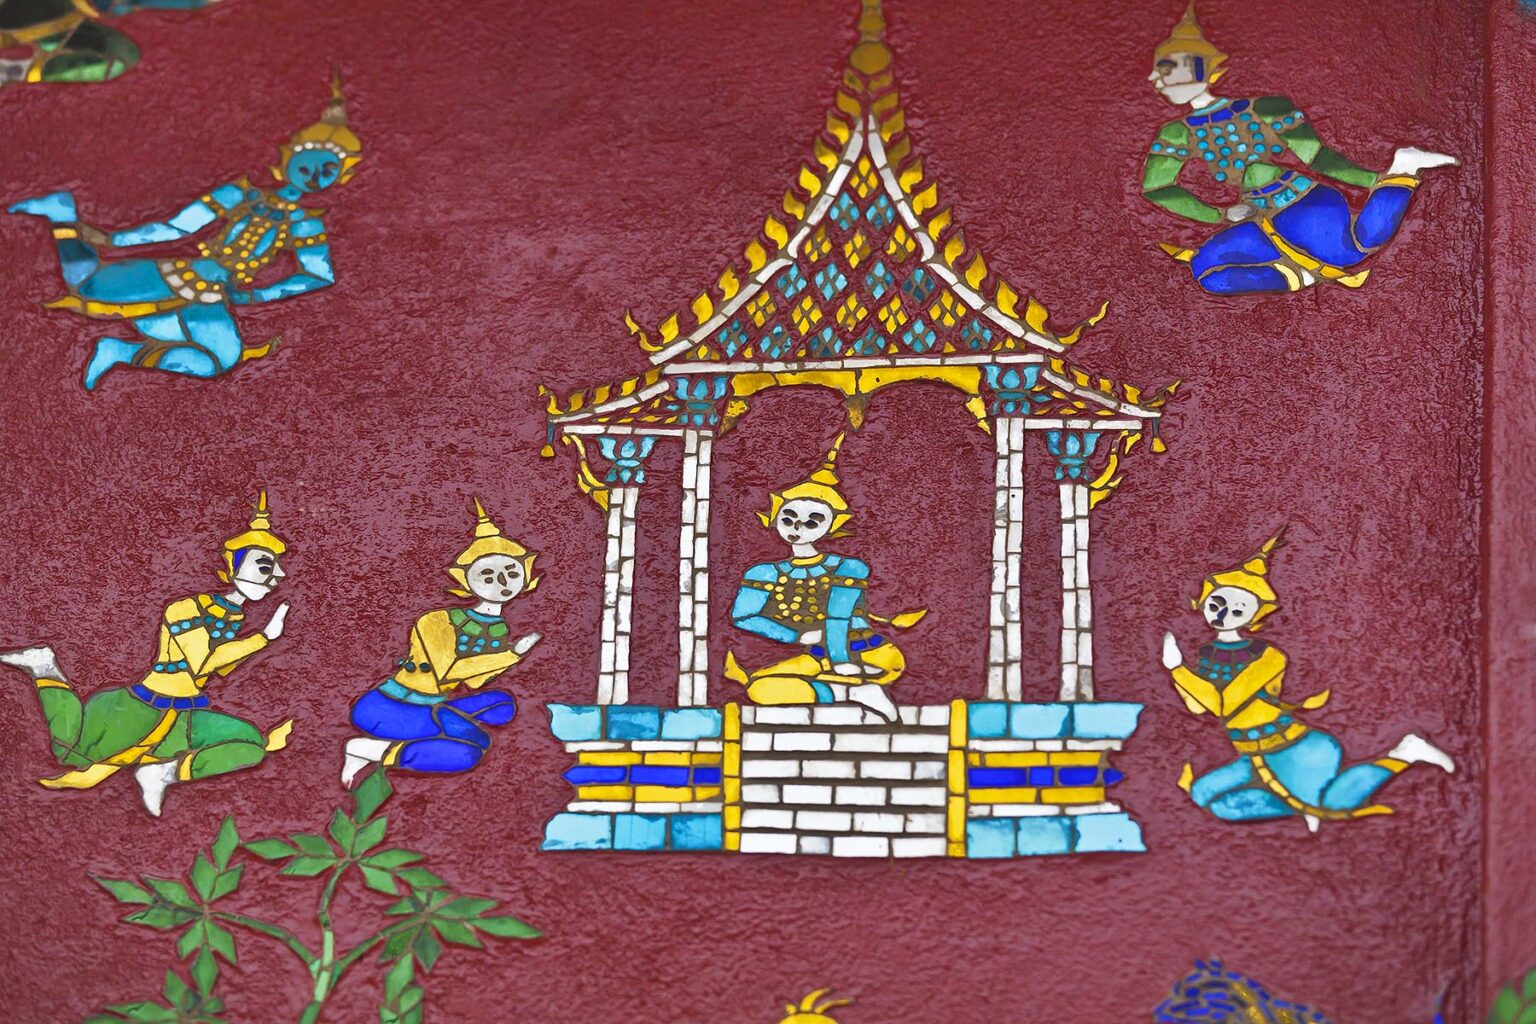 GLASS MOSAIC of deities at the Buddhist WAT XIENG THONG complex (Temple of the Golden City), built in 1560 - LUANG PRABANG, LAOS